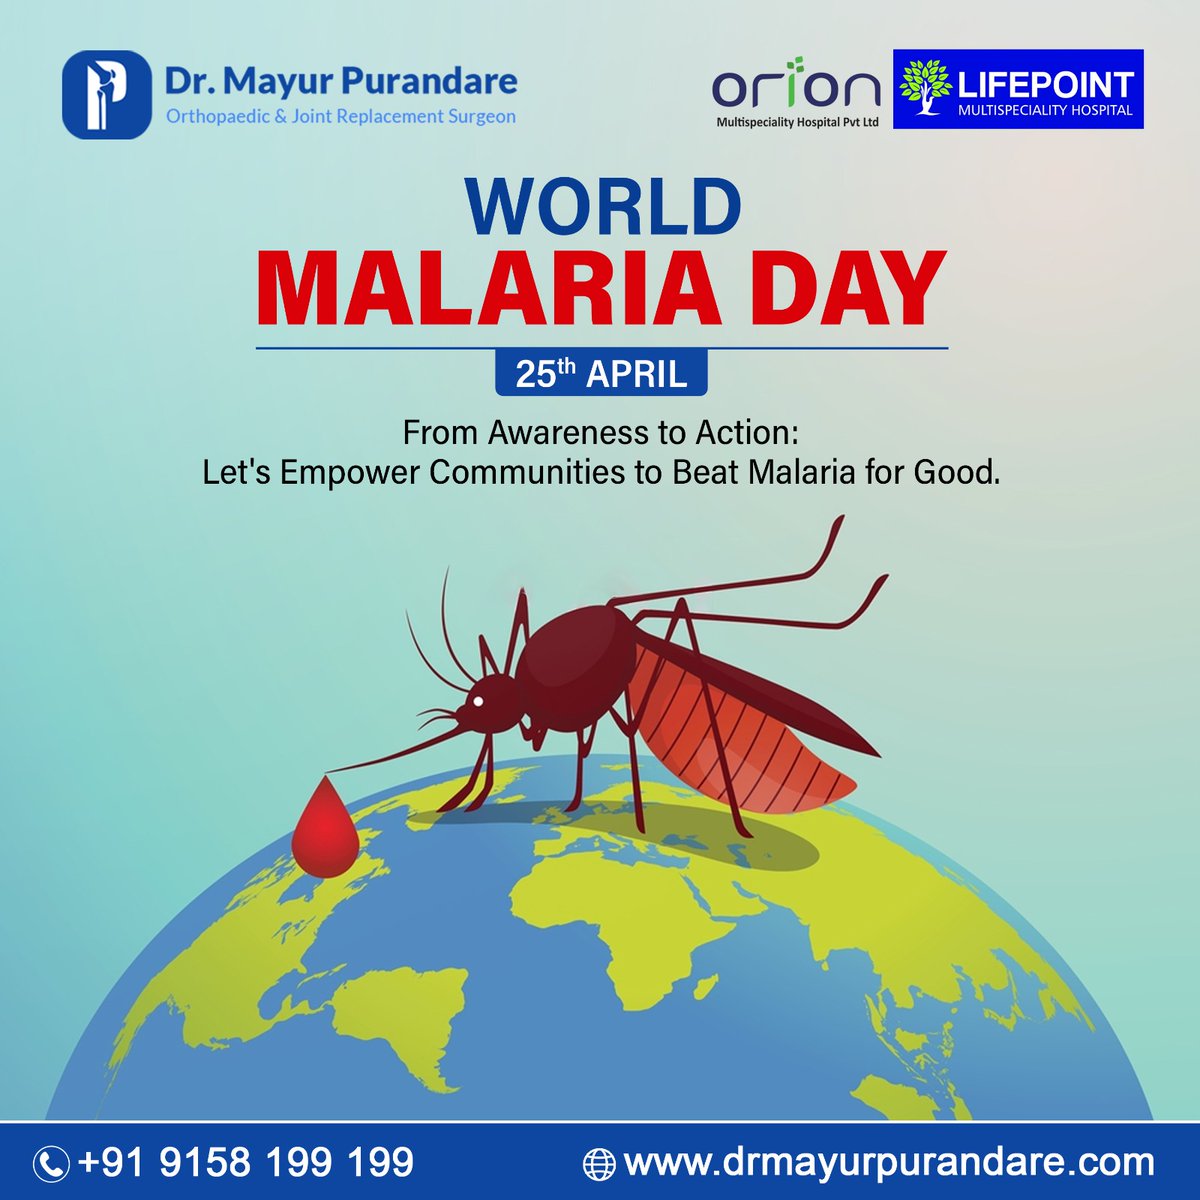 Warm wishes on the occasion of World Malaria Day to all. Let us come together to fight against this disease which has taken many lives.
.
.
#WorldMalariaDay #malariaday2024 #happyworldmalariaday #diseases #pune #wakad #hospitals #doctors #drmayurpurandare #ravet